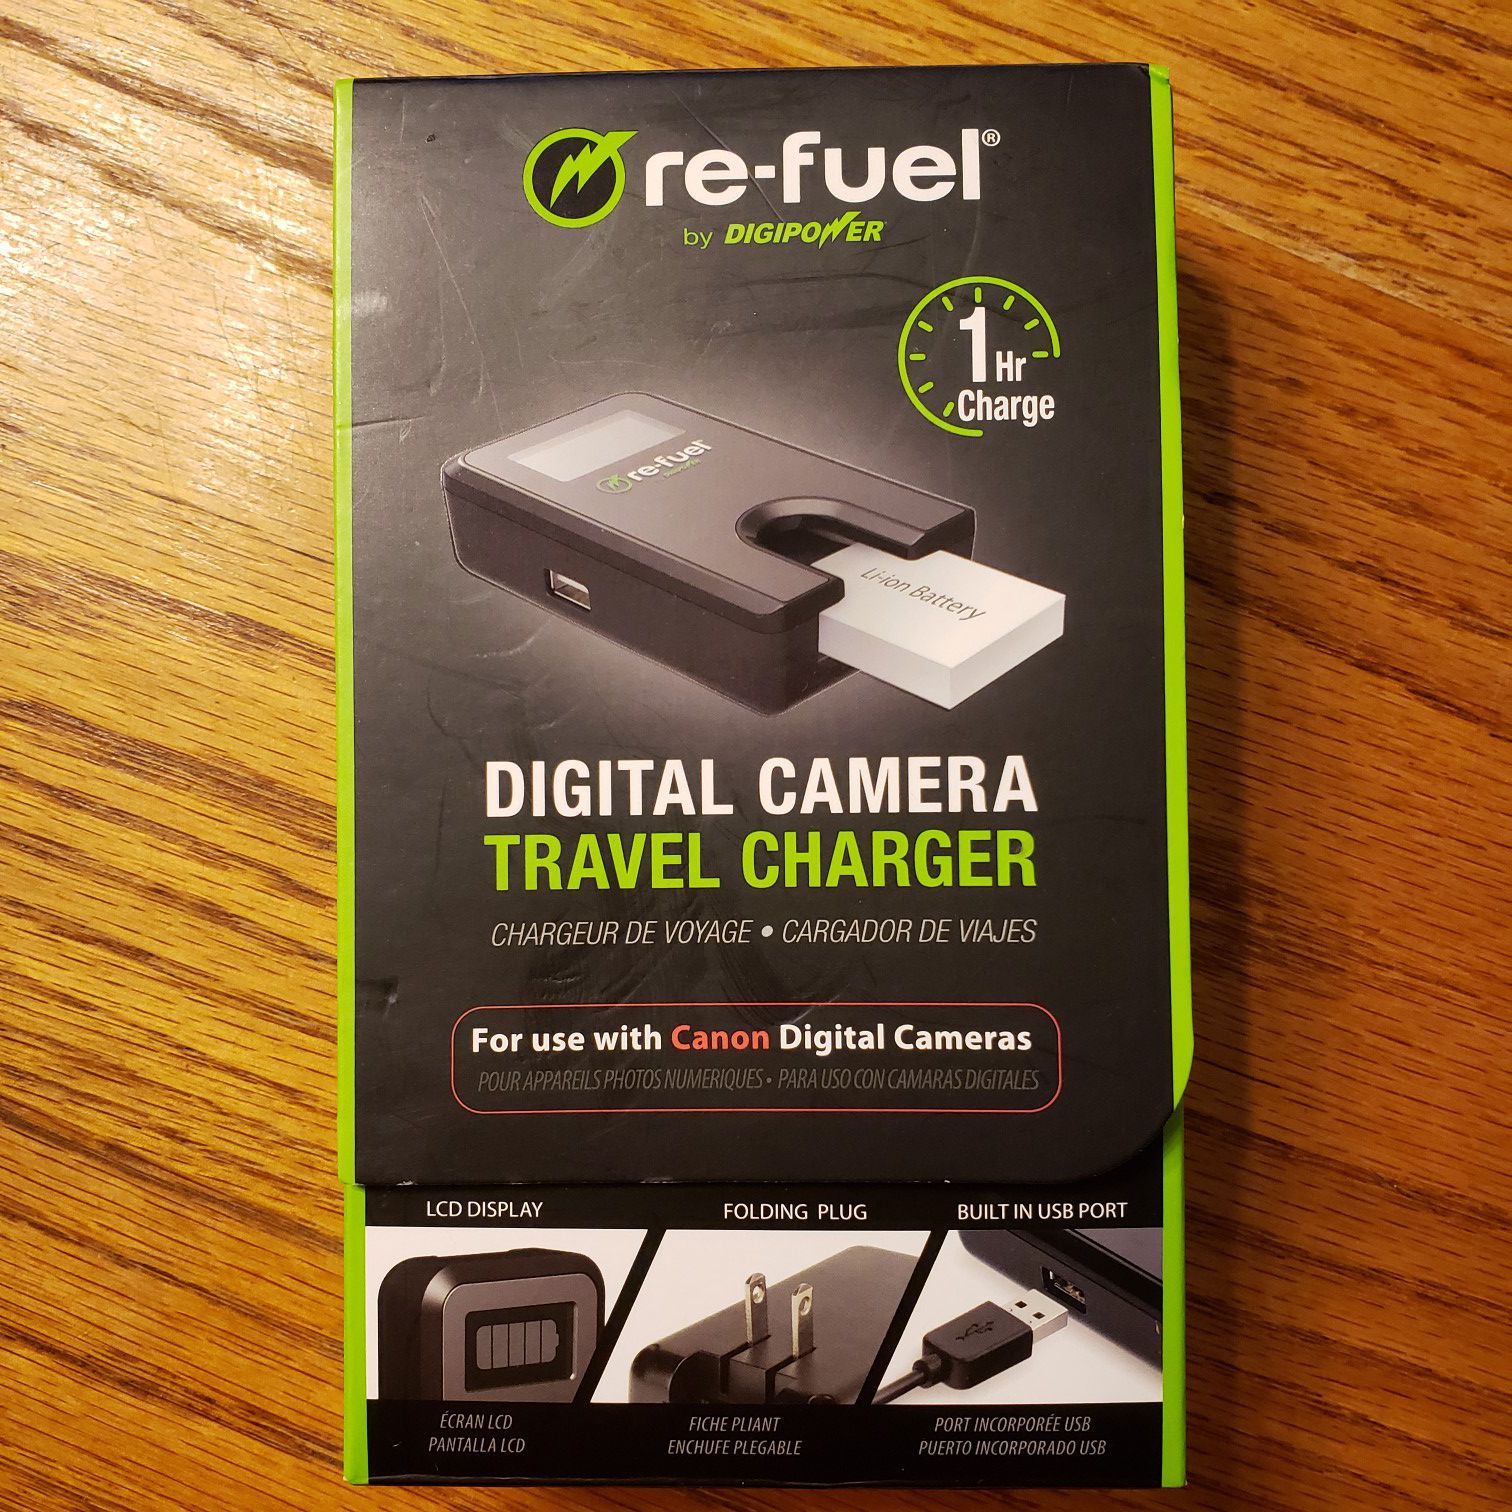 Re-fuel by DIGIPOWER Digital Camera Travel Charger for CANON Camera